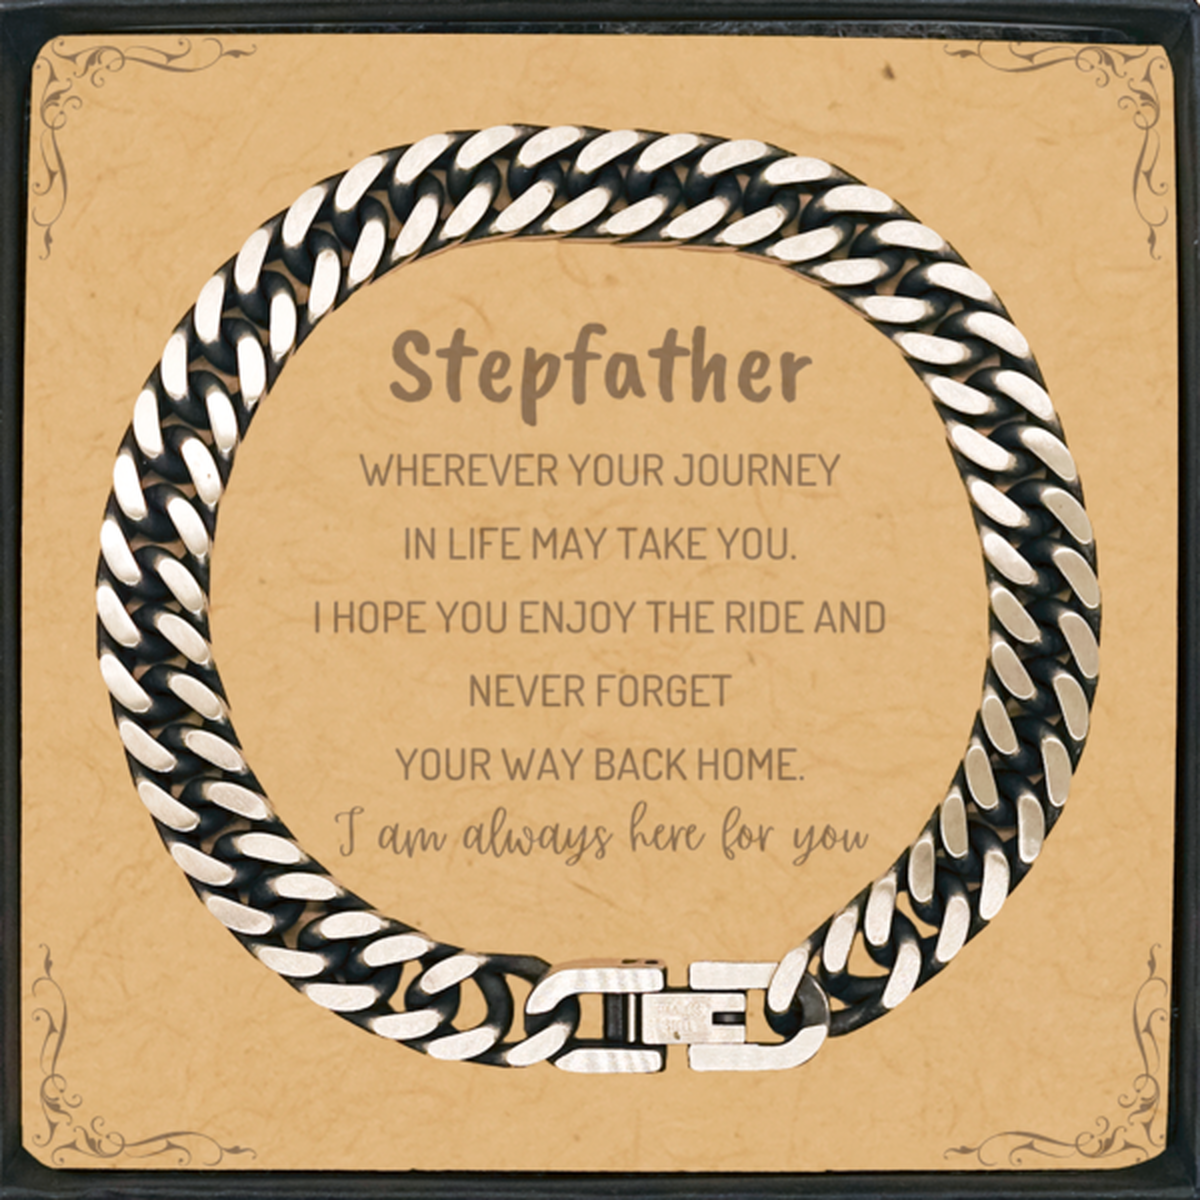 Stepfather wherever your journey in life may take you, I am always here for you Stepfather Cuban Link Chain Bracelet, Awesome Christmas Gifts For Stepfather Message Card, Stepfather Birthday Gifts for Men Women Family Loved One